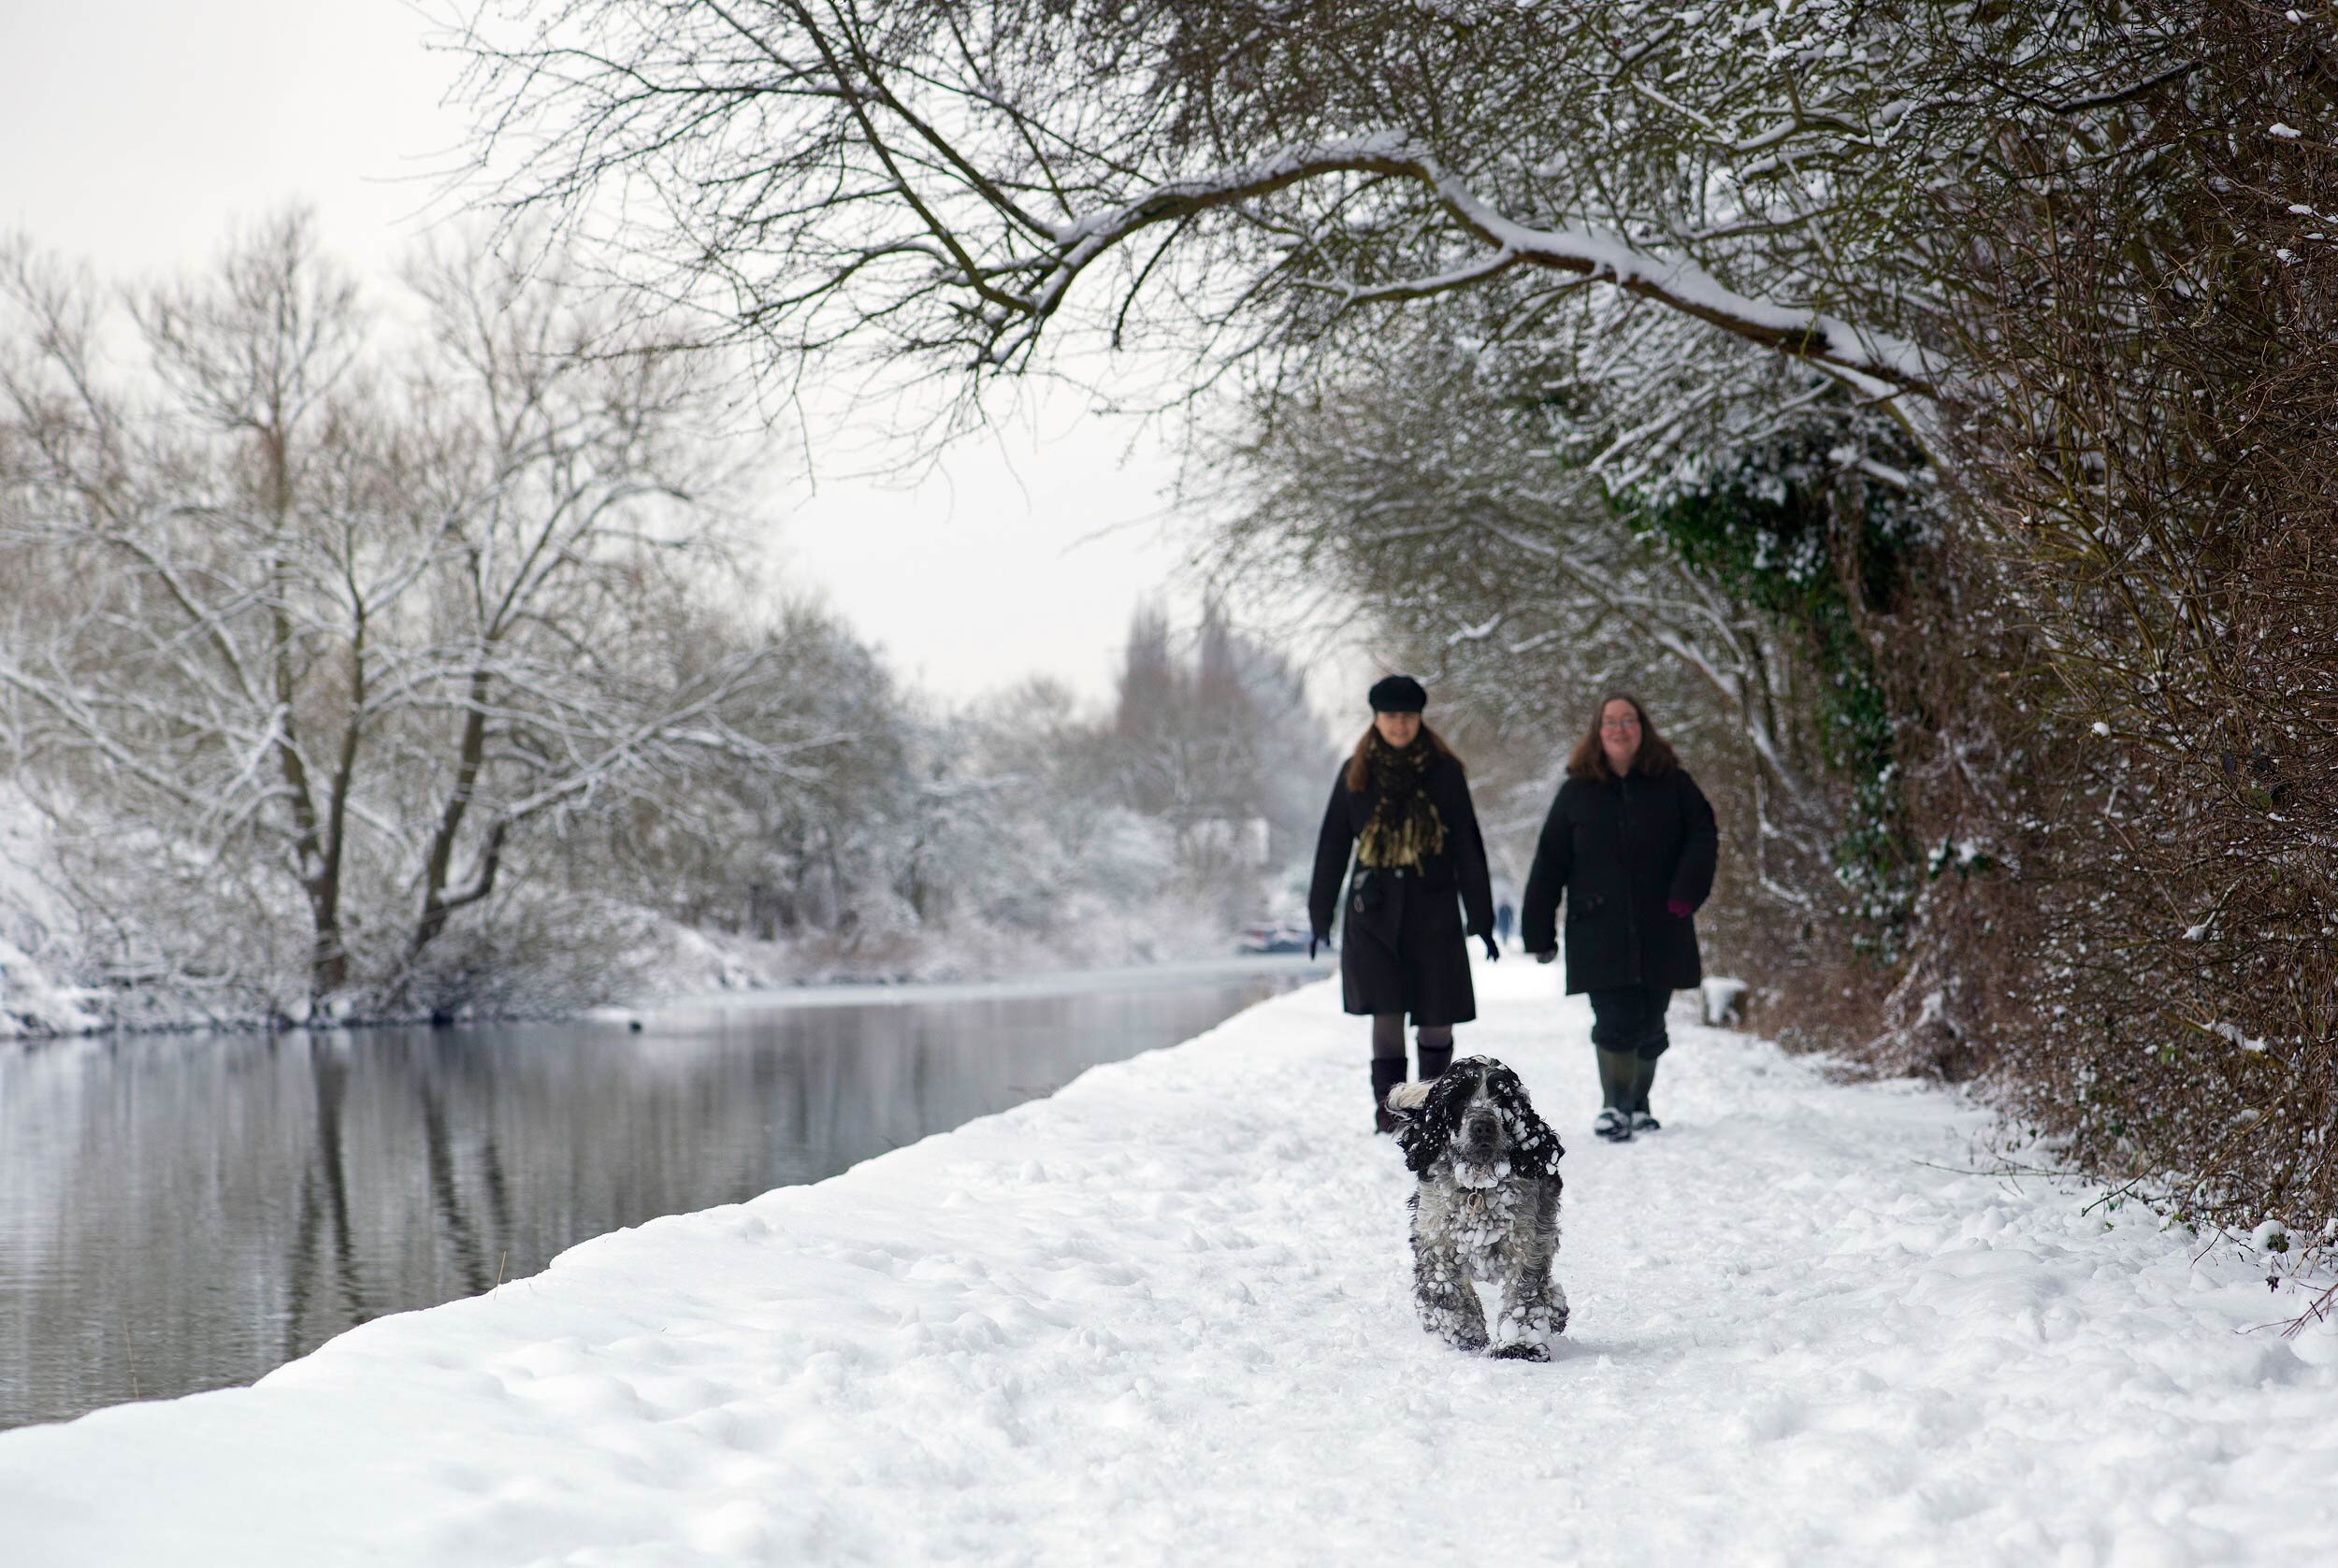  Lee Valley Park. River Lee Country Park in snow. Dog walkers on the towpath.  Shot by Eleanor Bentall, photographer. 